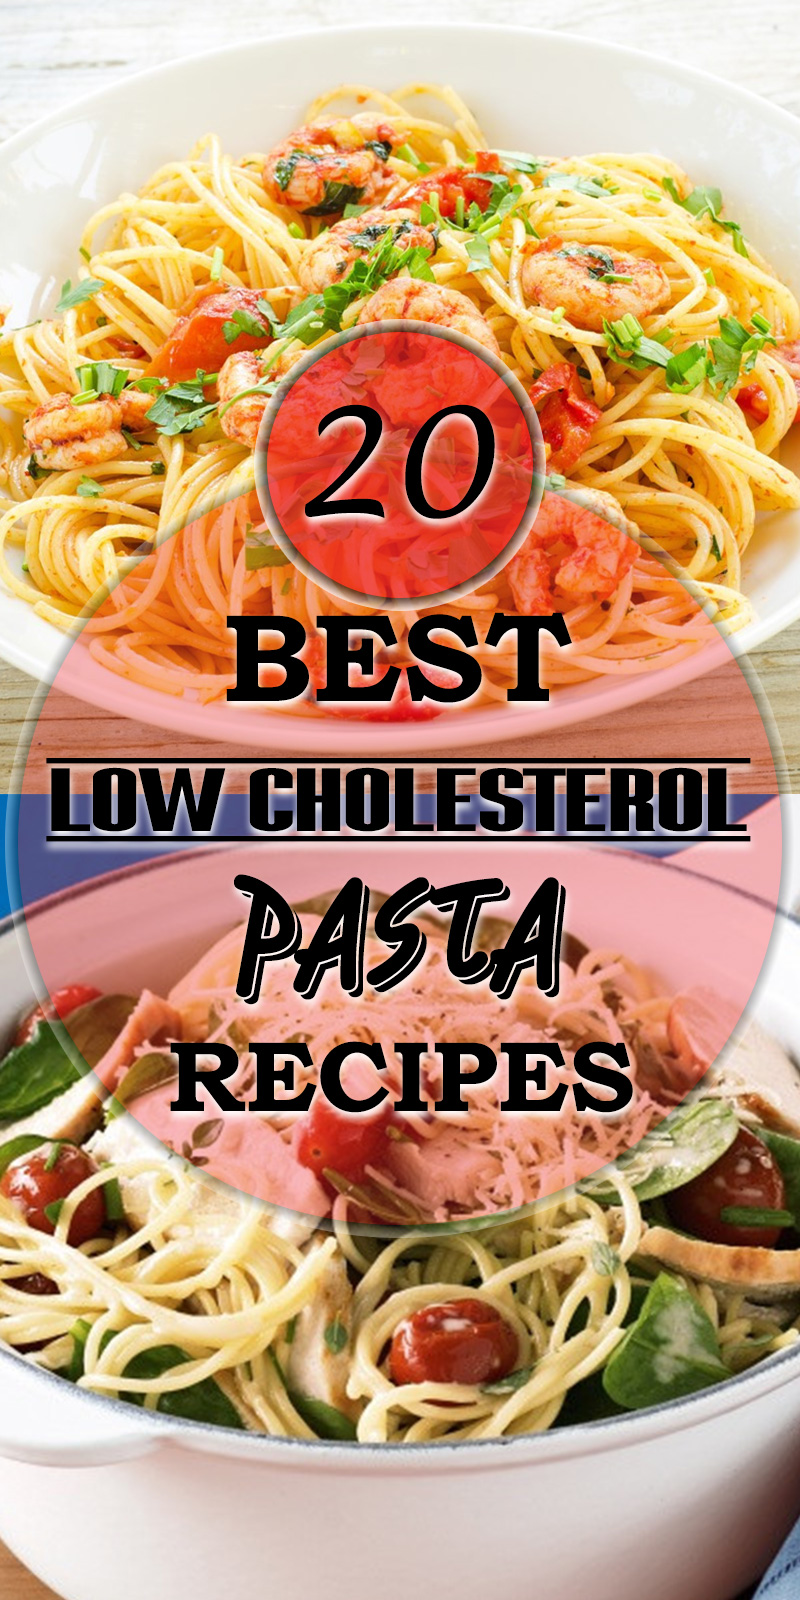 Top 20 Low Cholesterol Pasta Recipes Best Diet And Healthy Recipes Ever Recipes Collection